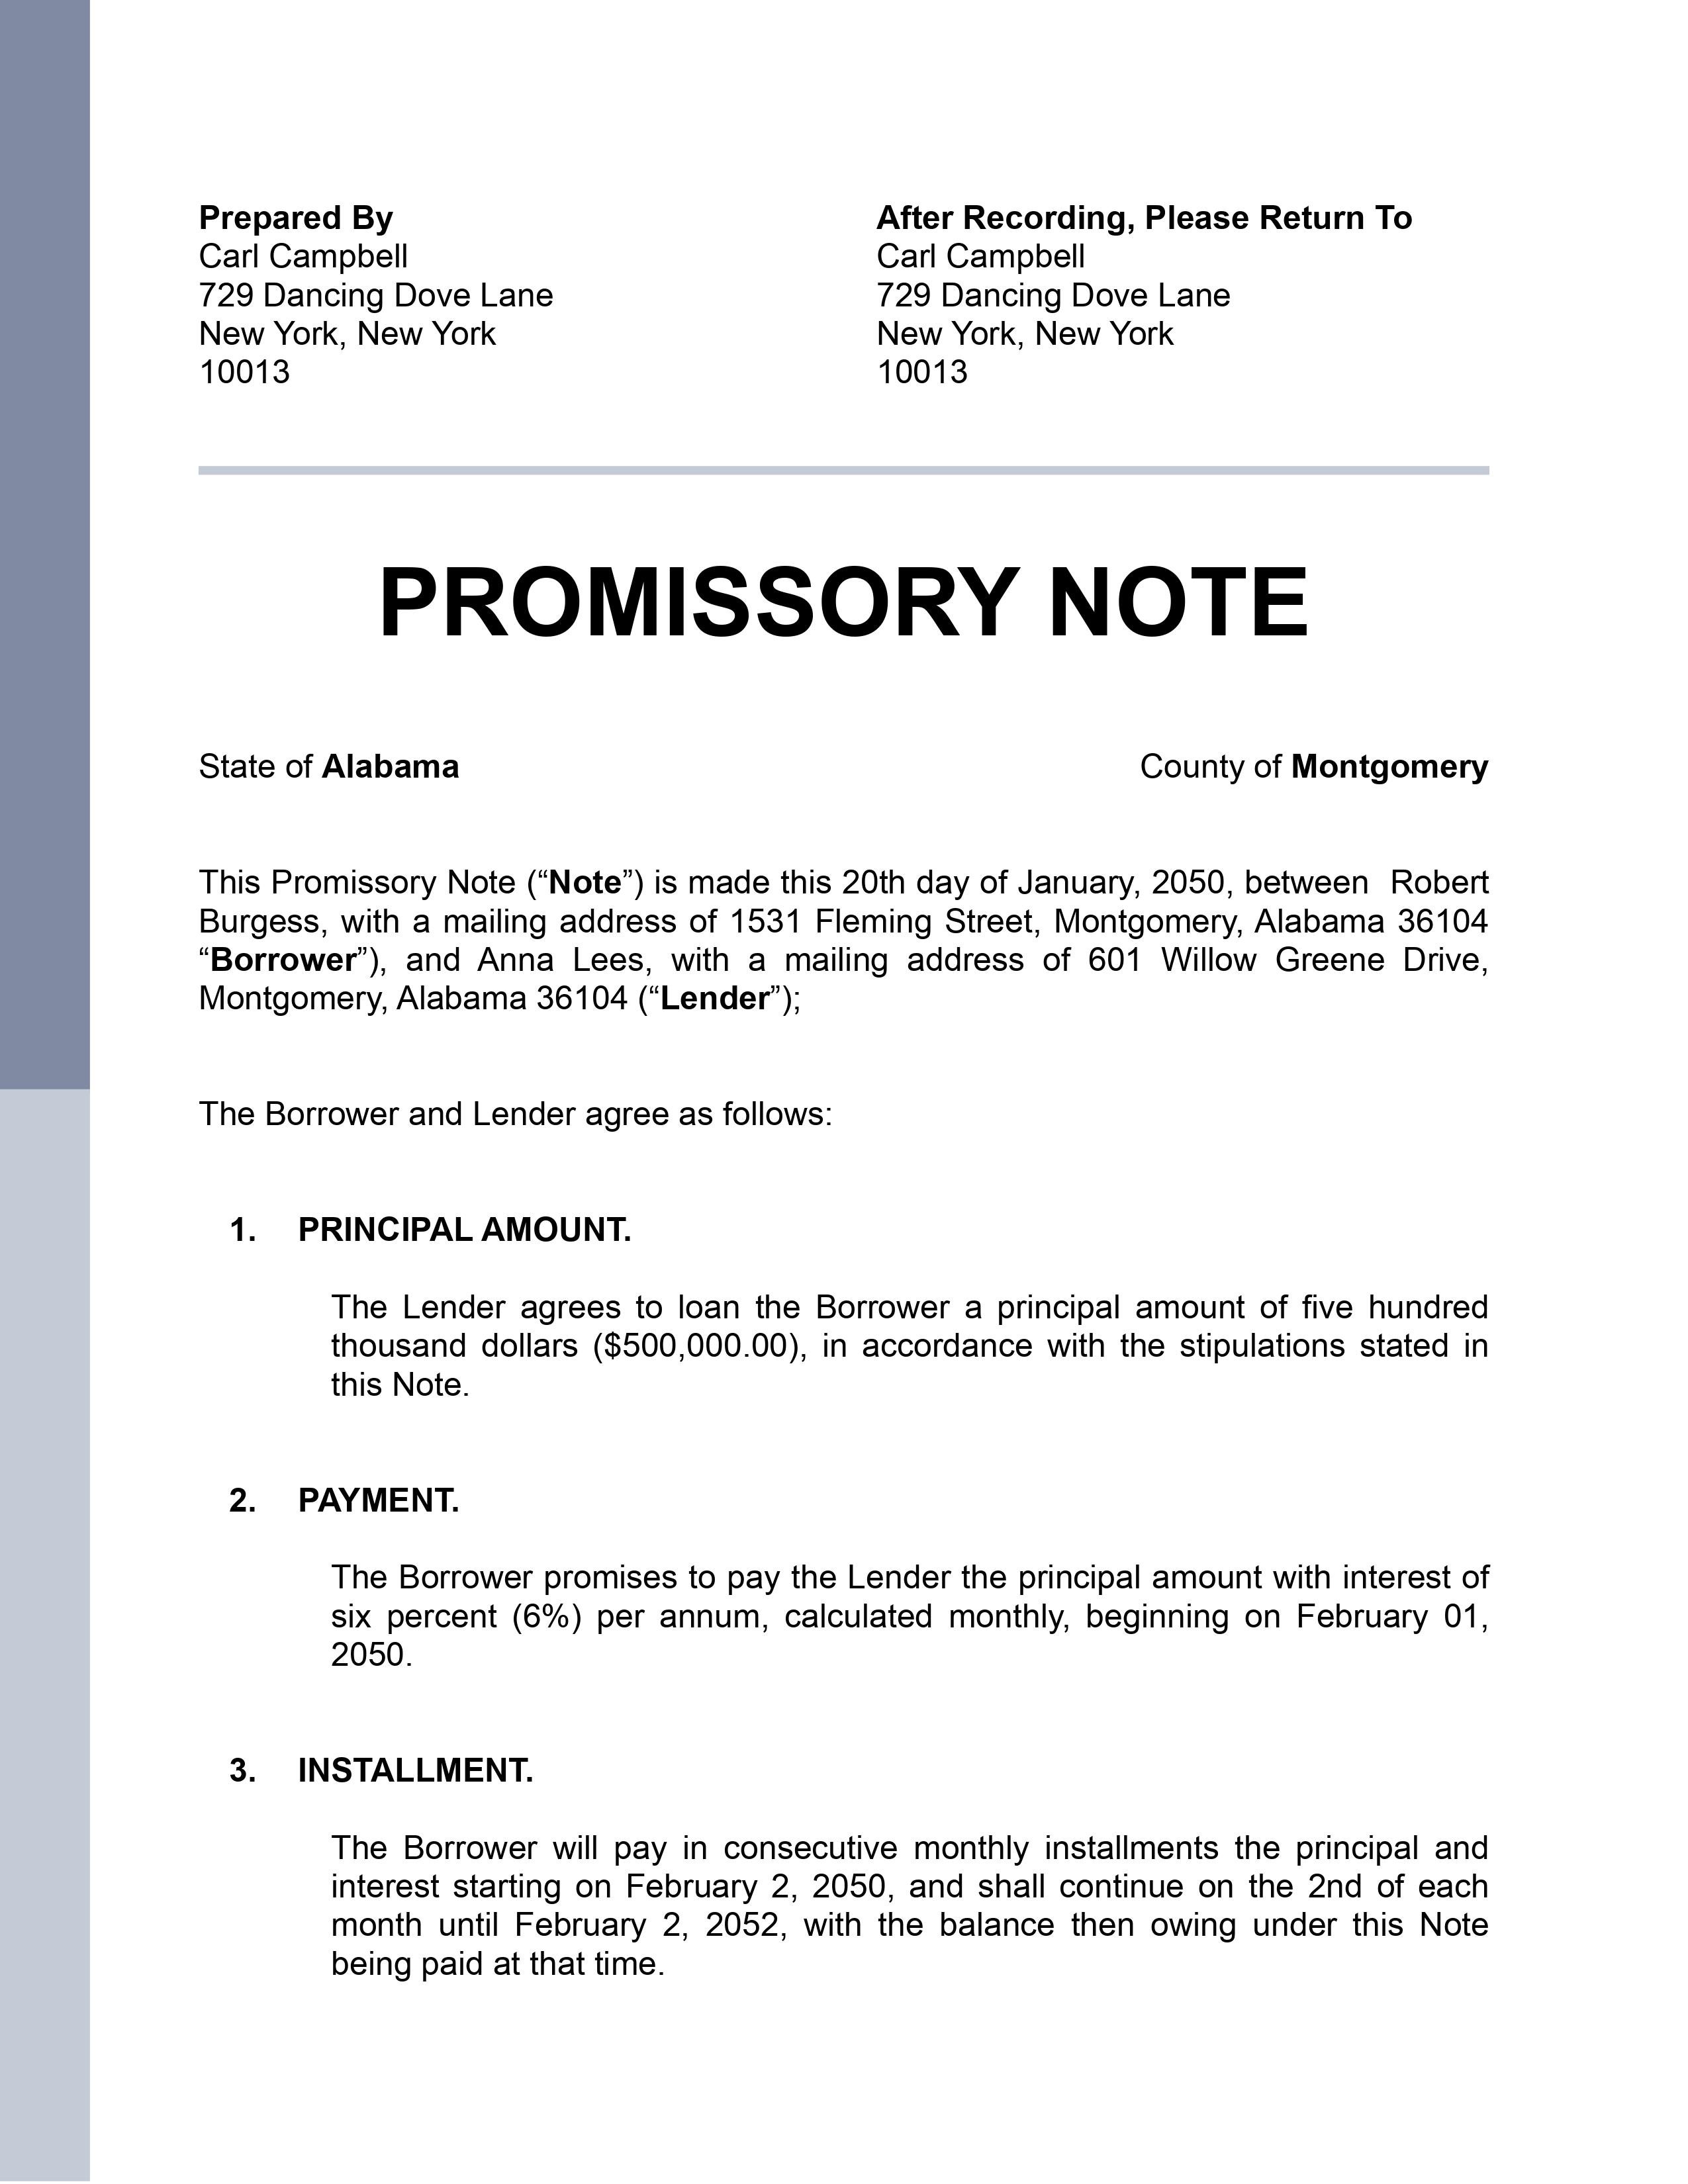 Promissory Note Sample Letter For Your Needs Letter T - vrogue.co